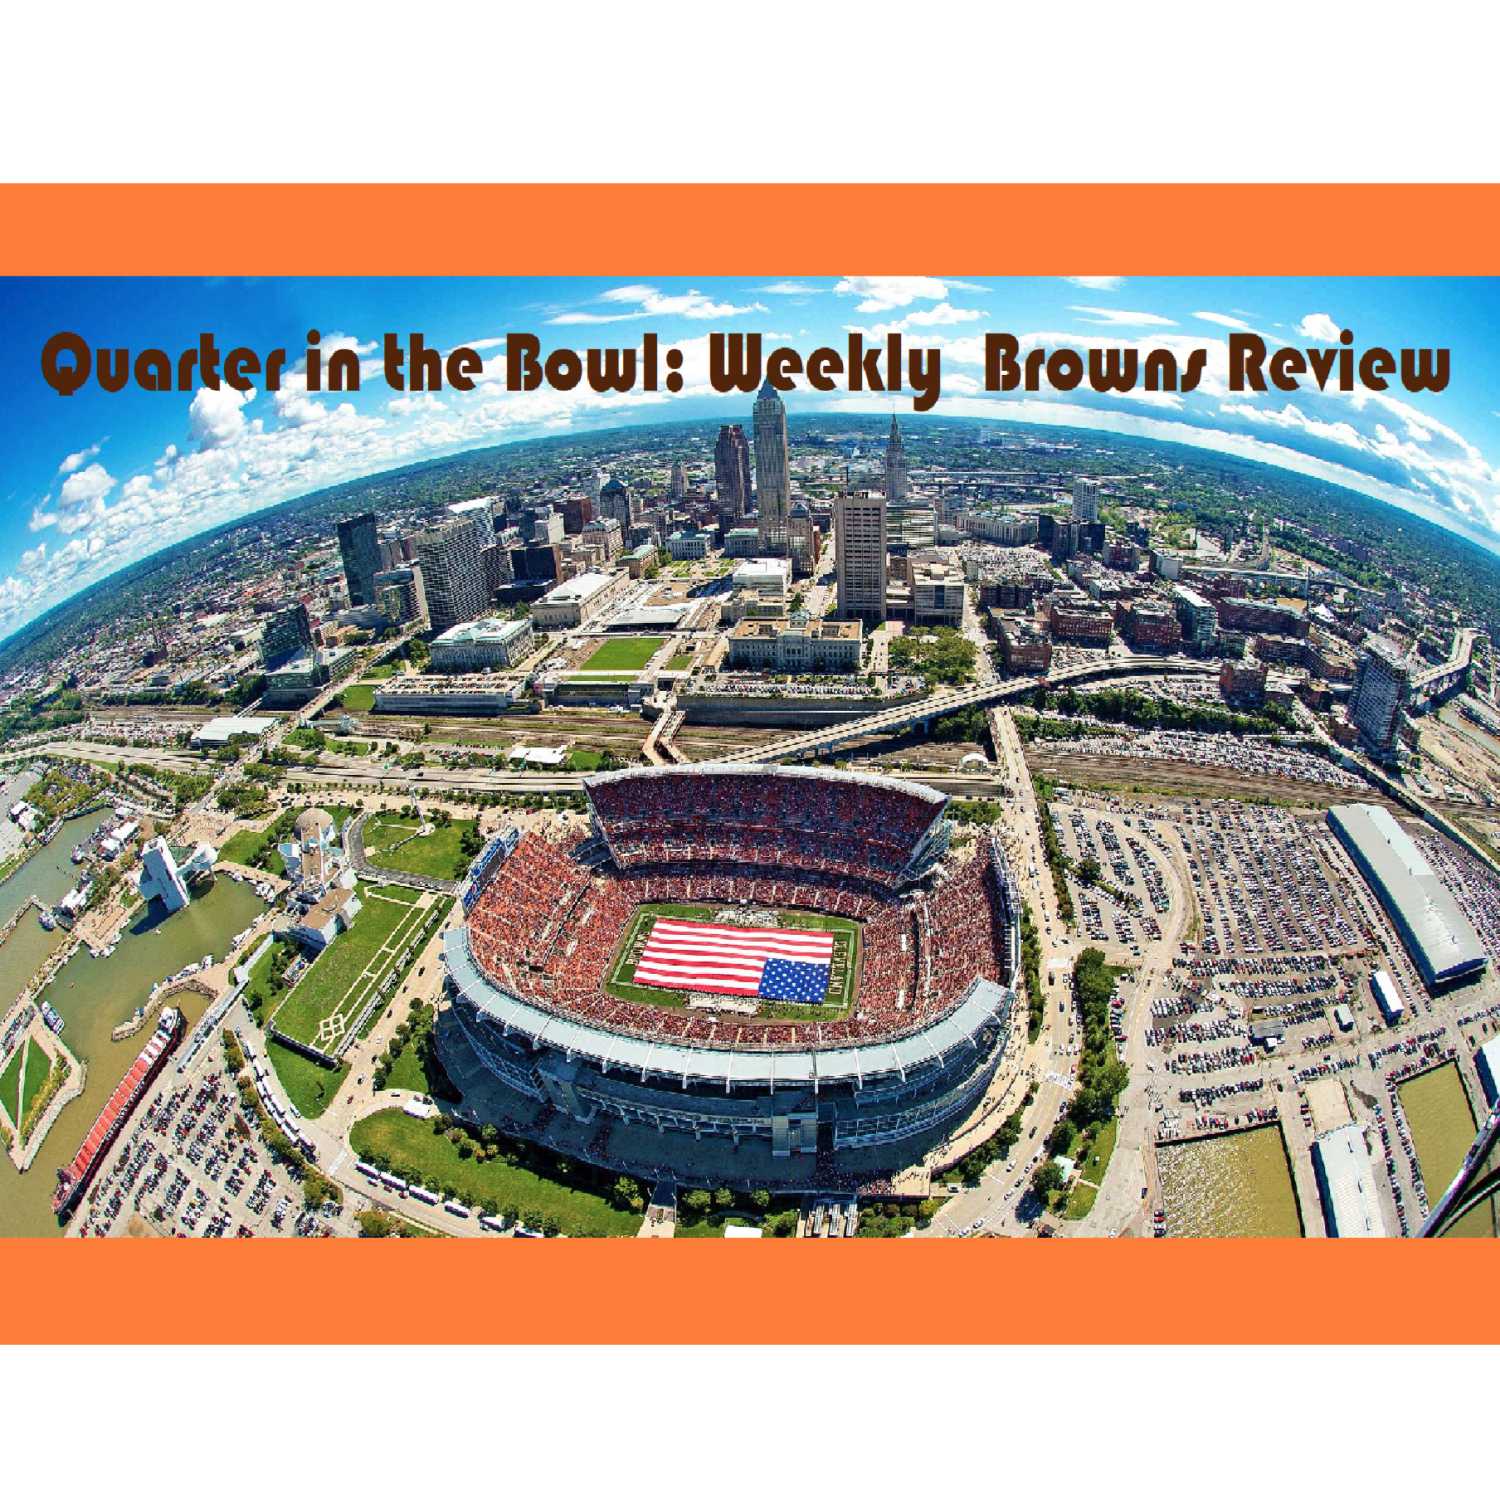 Quarter in the Bowl: Weekly Browns Review